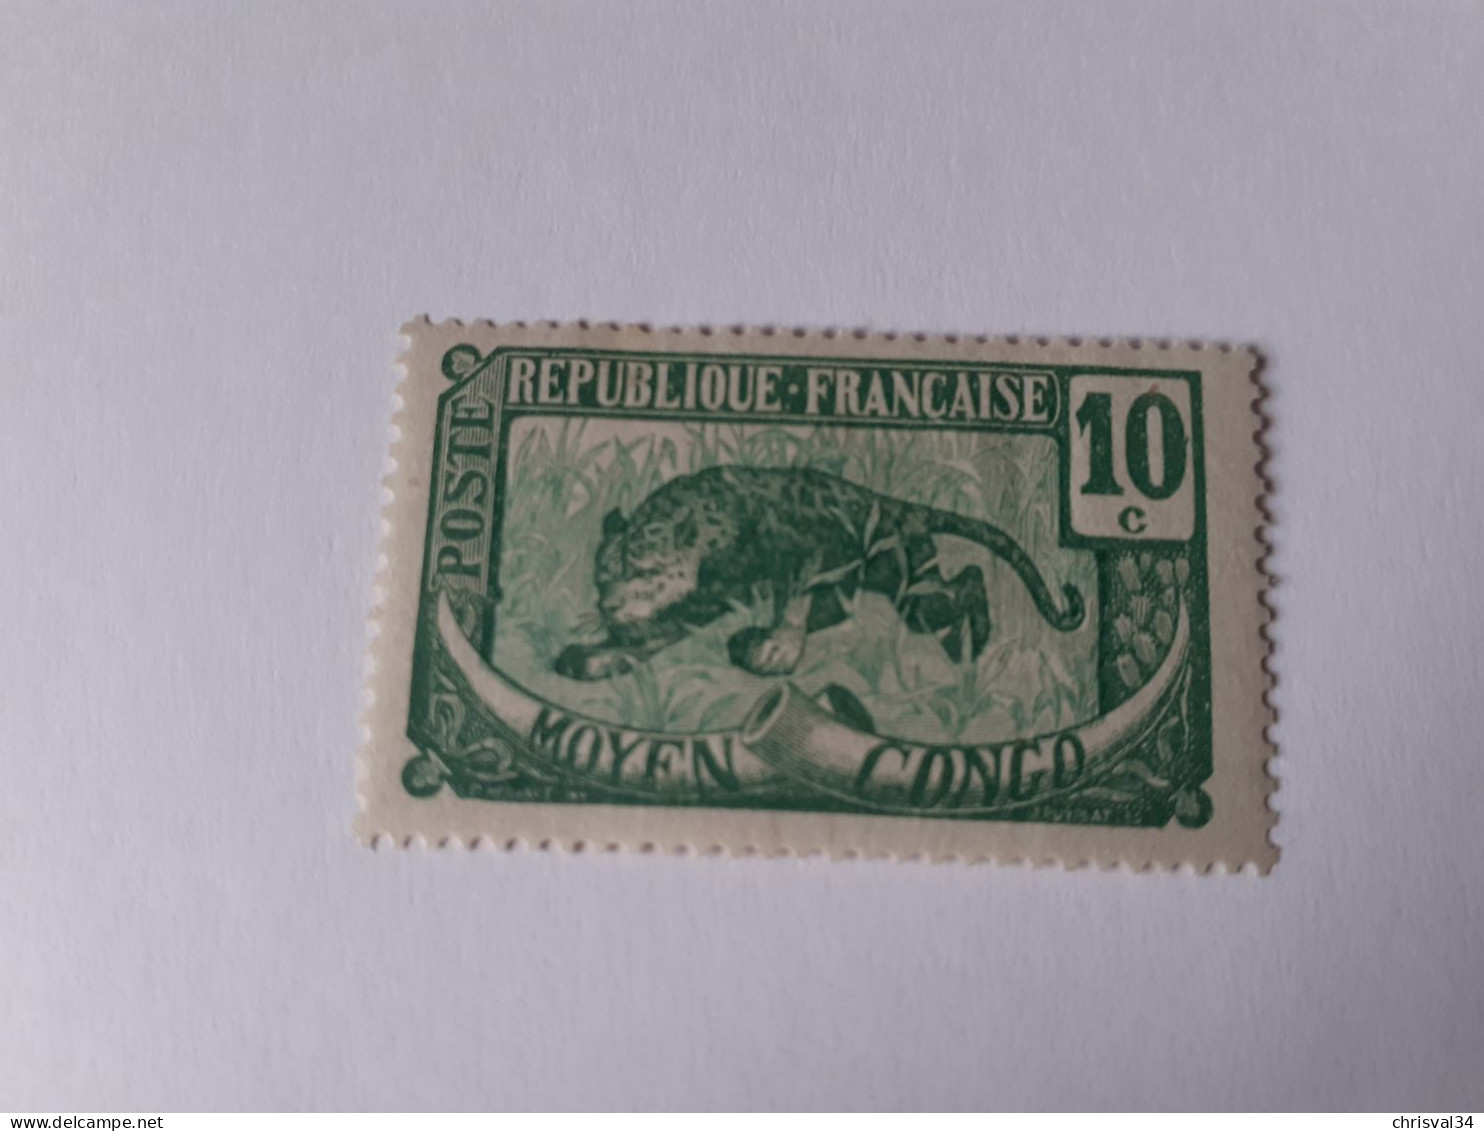 TIMBRE  CONGO    N  68     COTE  6,00  EUROS    NEUF  TRACE  CHARNIERE - Neufs